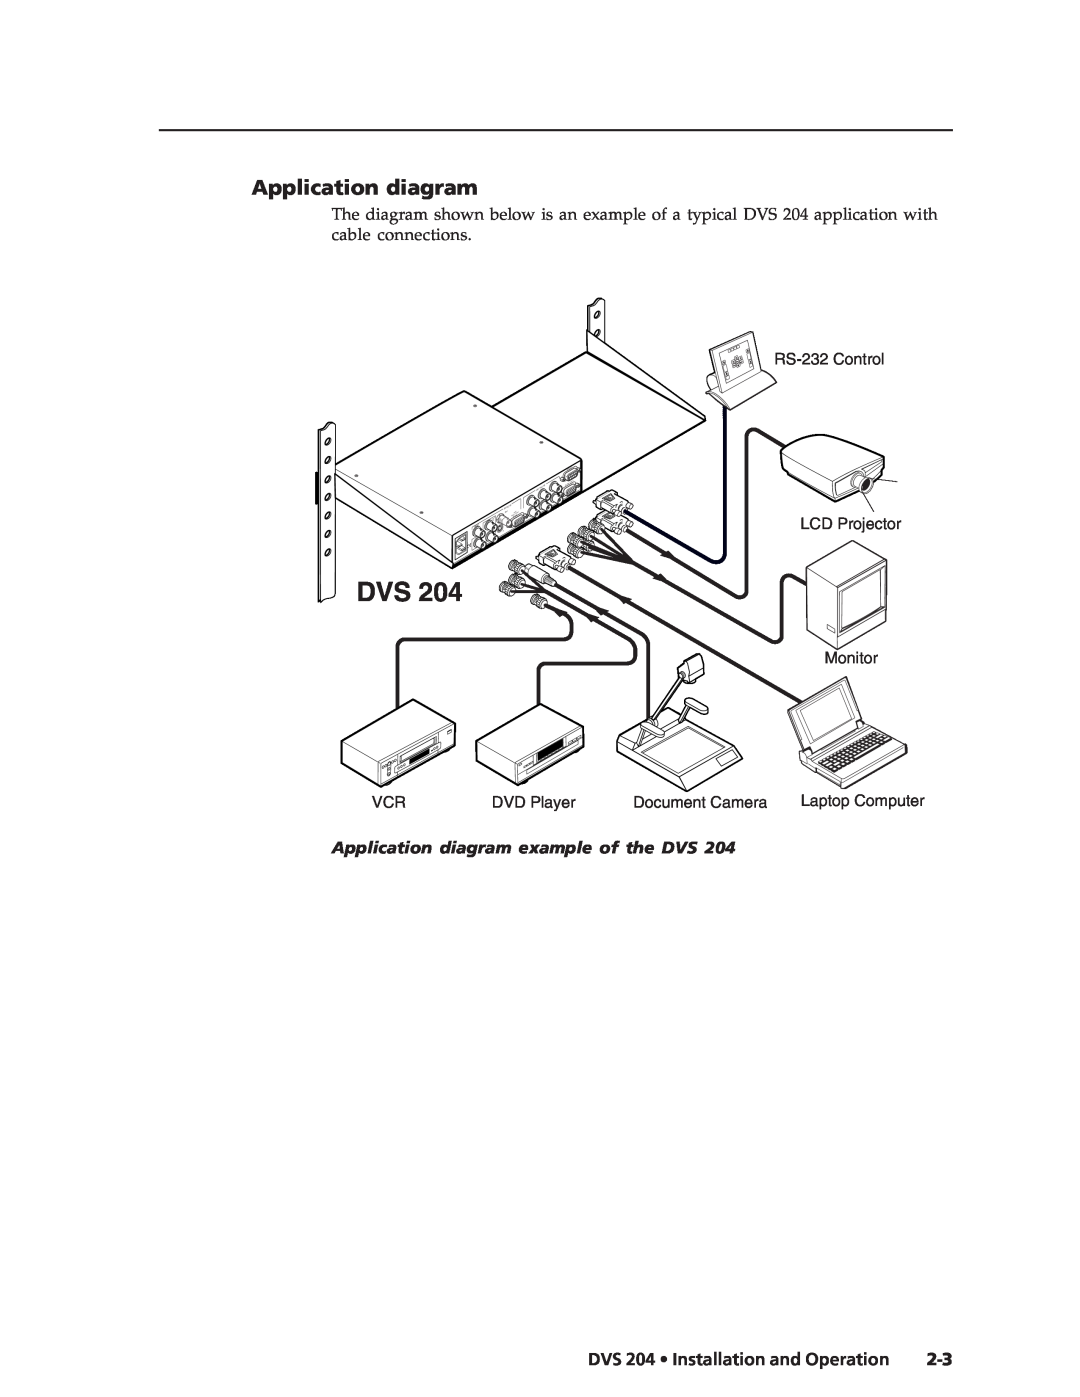 Extron electronic Application diagram example of the DVS, DVS 204 Installation and Operation, RS-232 Control, Video 